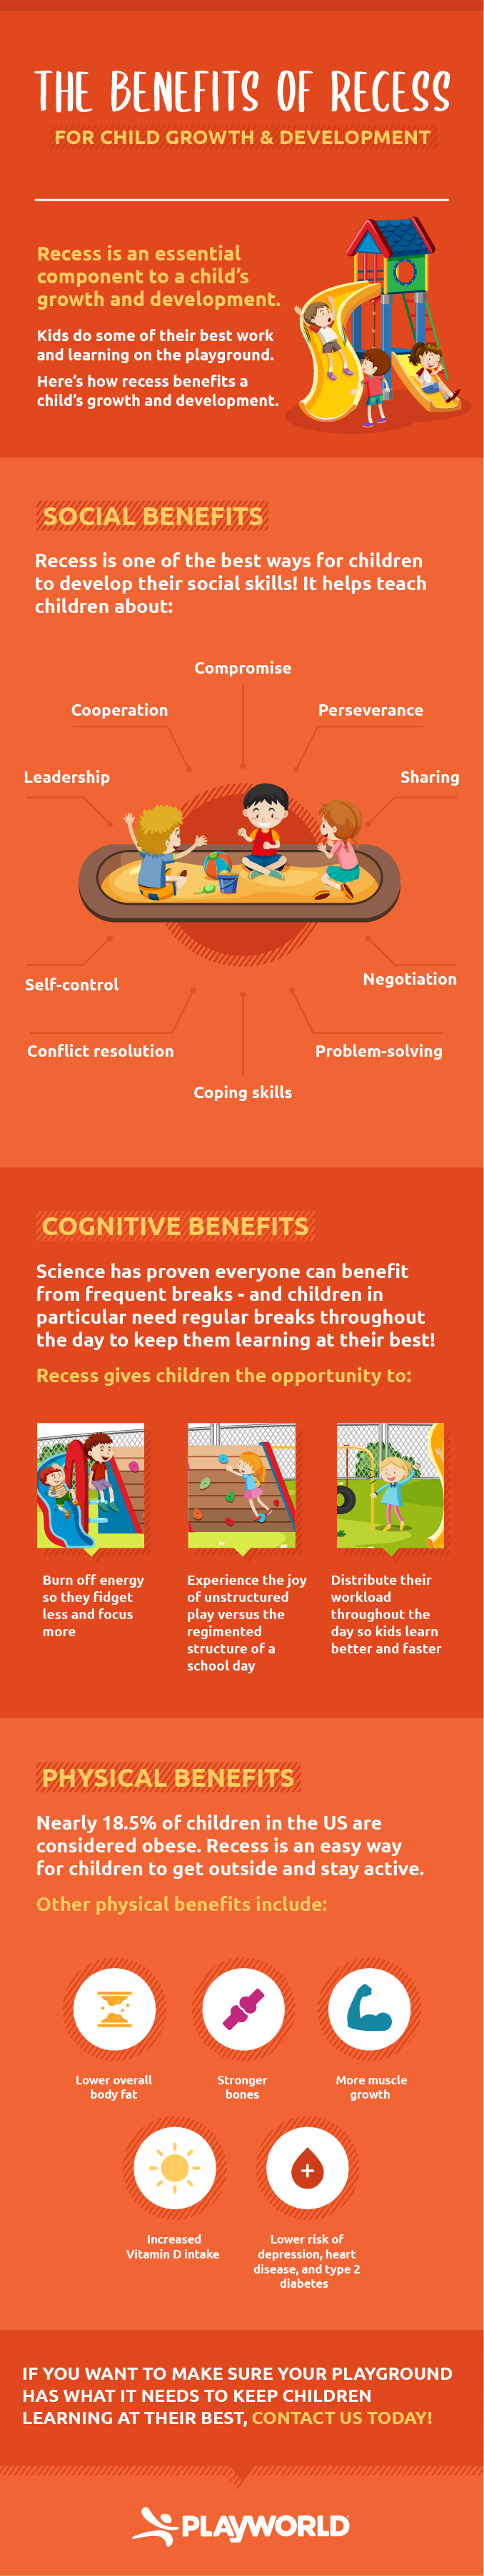 The Benefits Of Recess